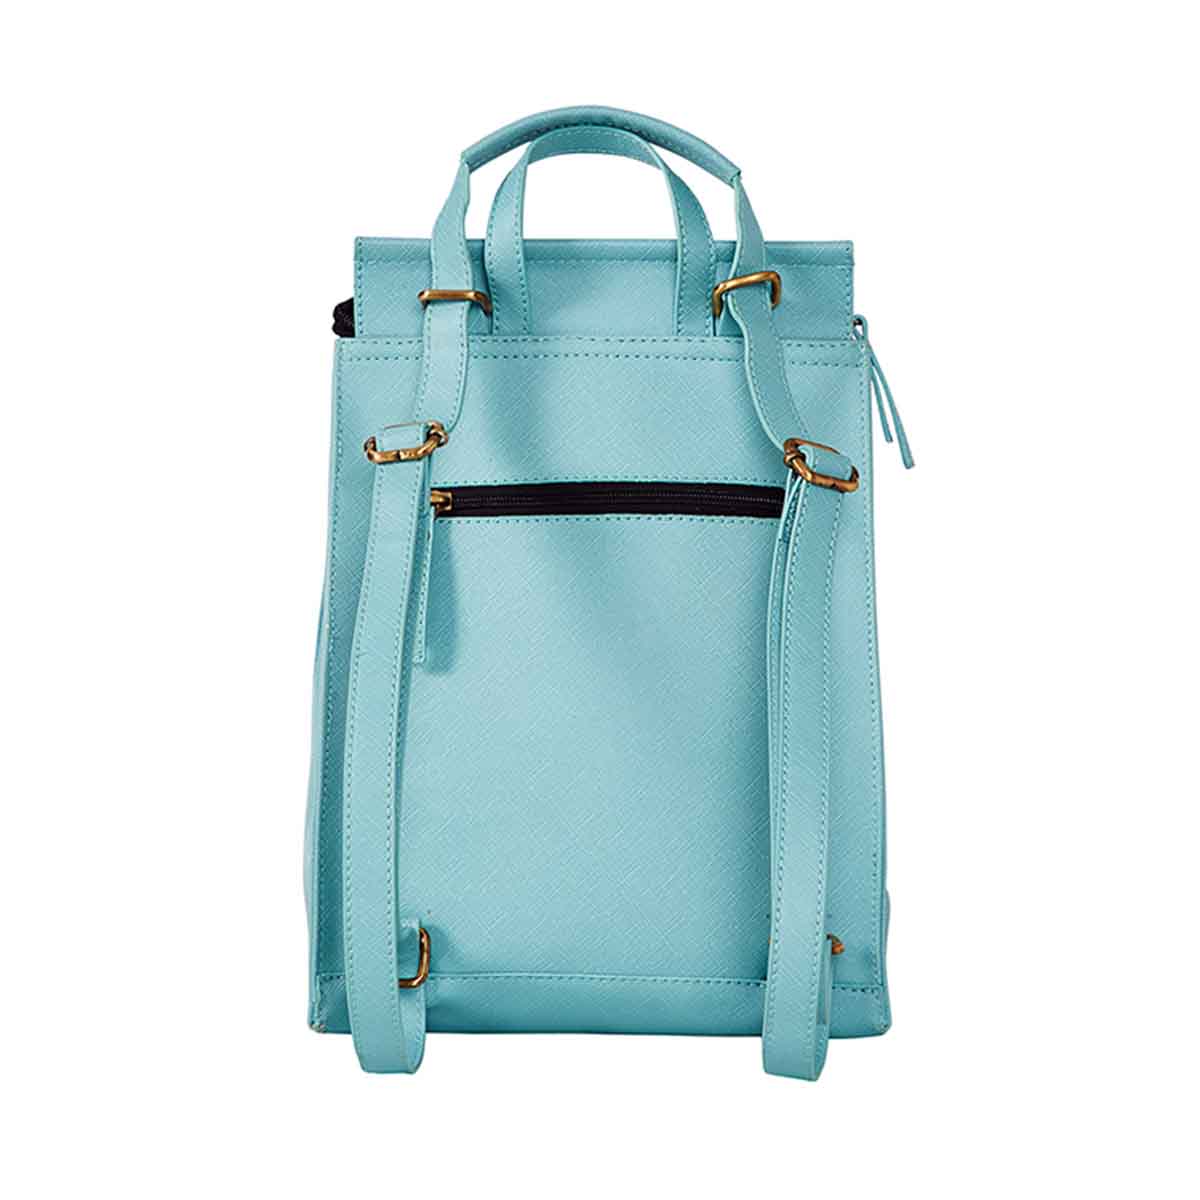 Mona B Convertible Backpack for Offices Schools and Colleges with Stylish Design for Women (Turquoise)